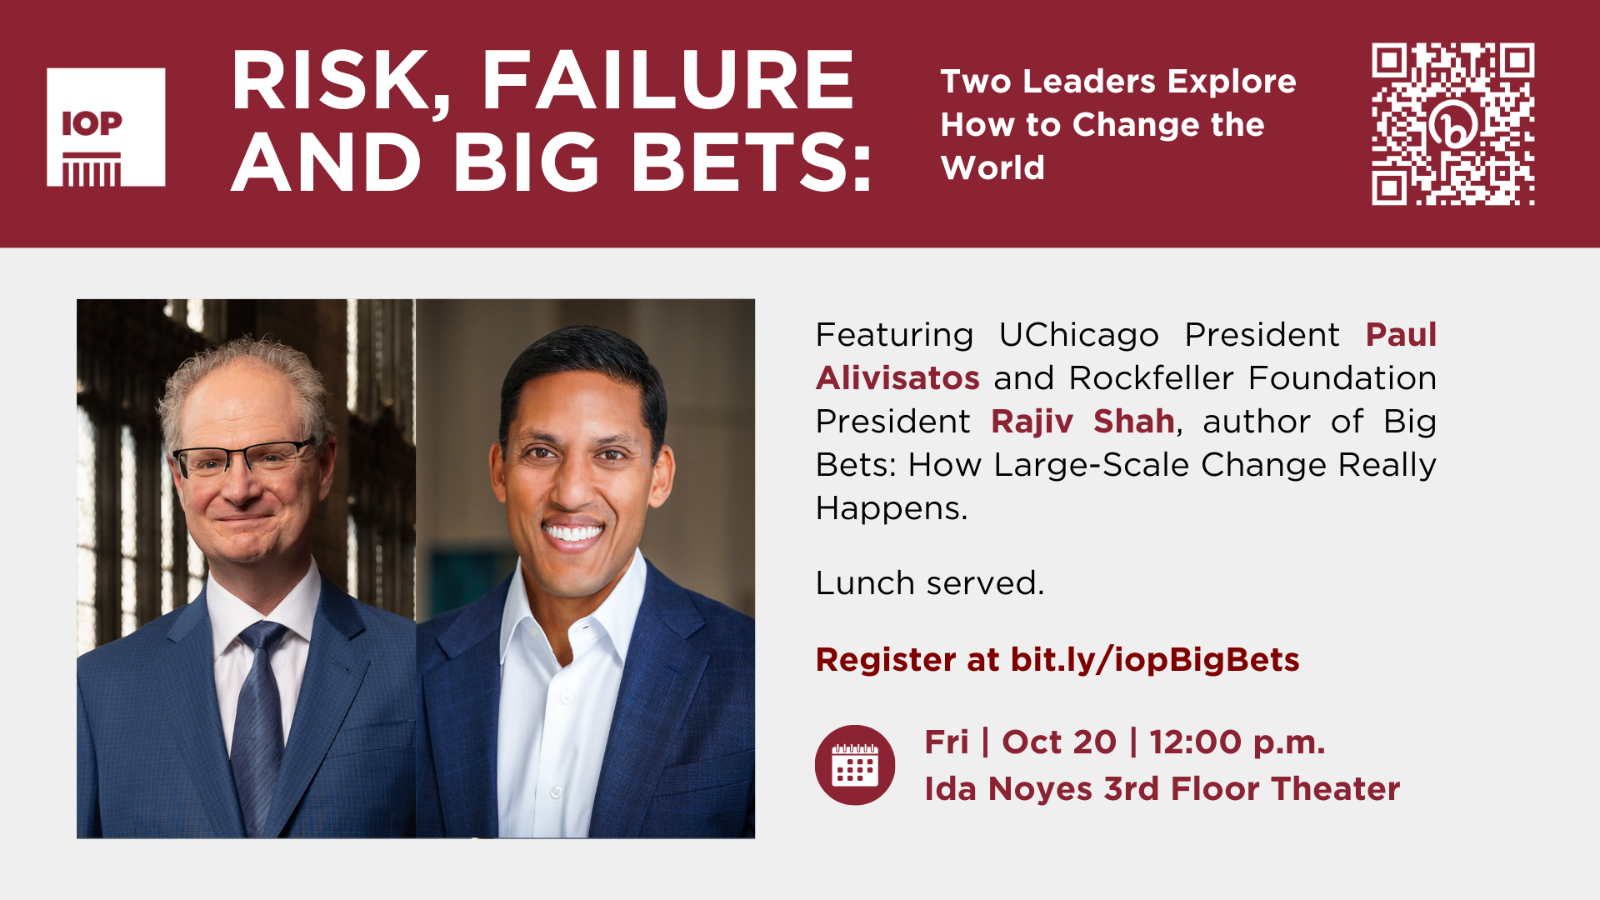 Poster Image for Risk, Failure and Big Bets: Two Leaders Explore How to Change the World